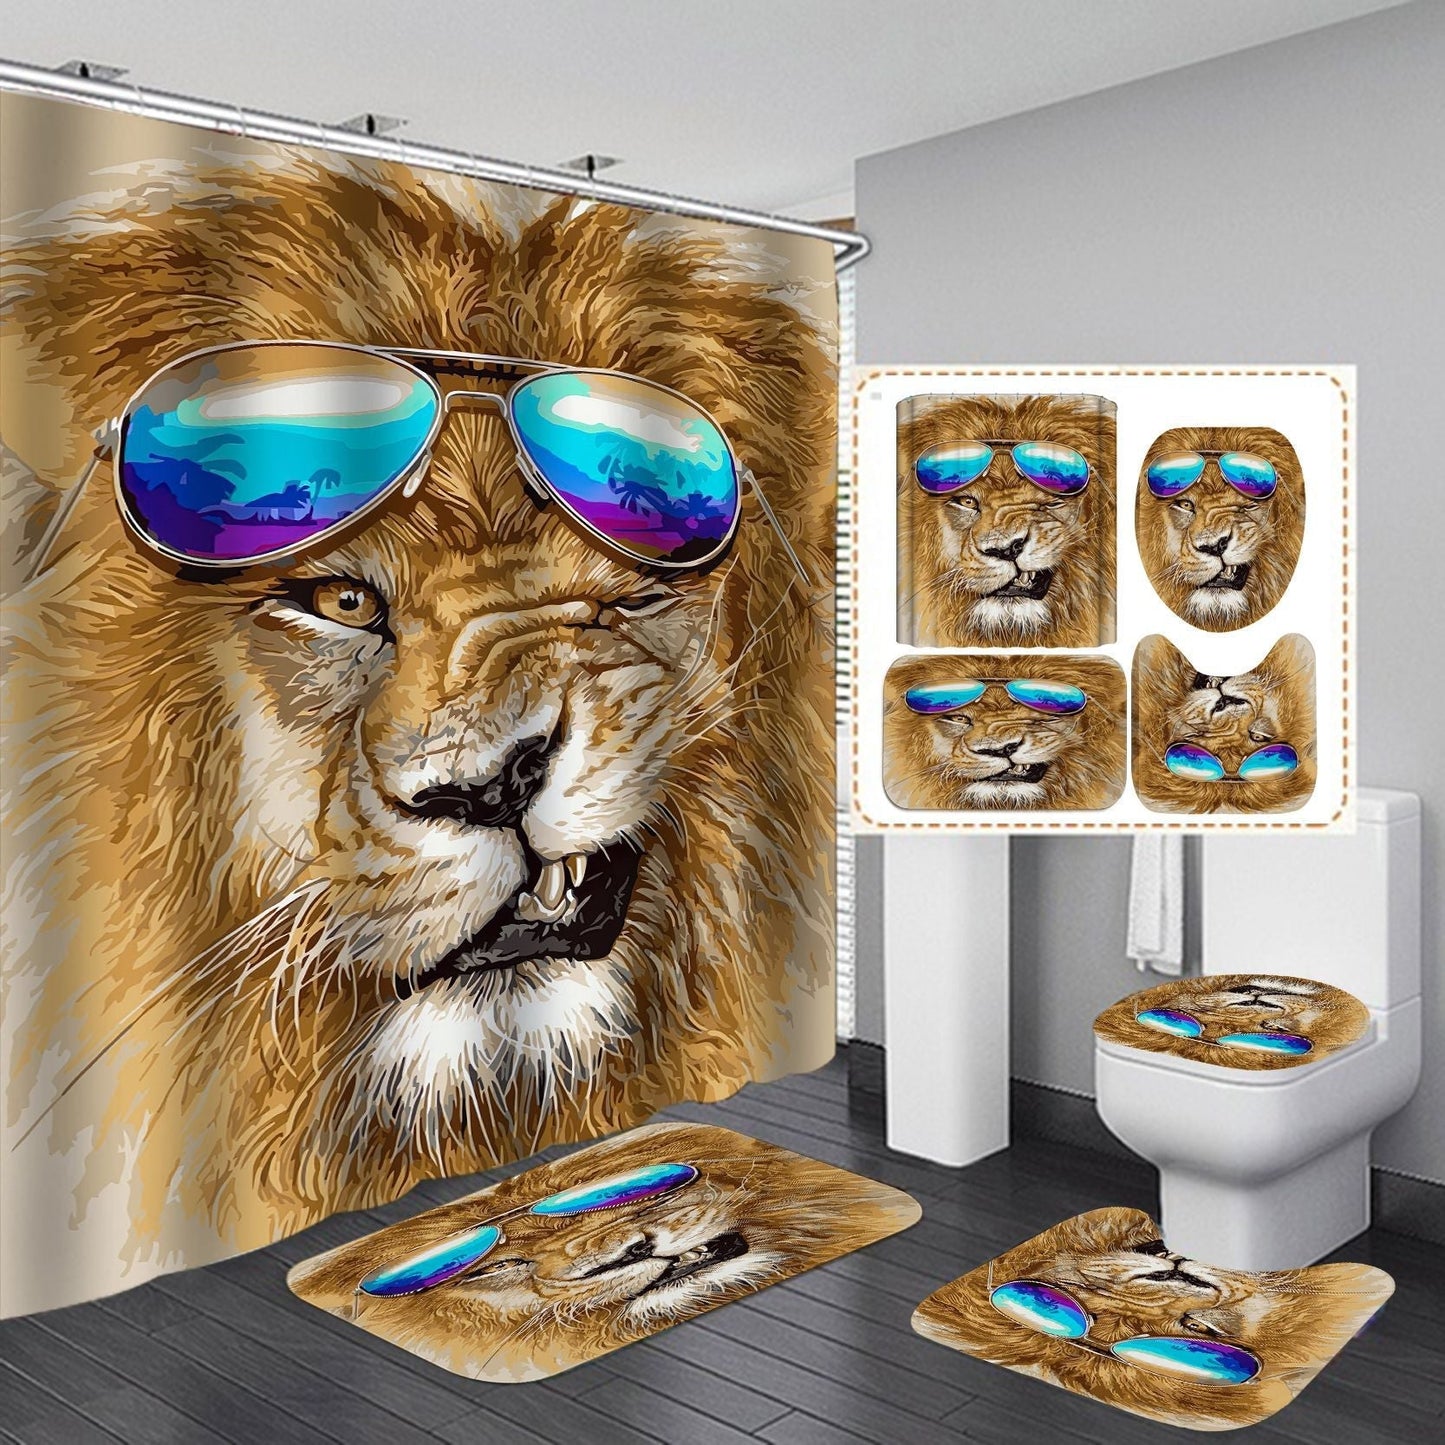 3D Lion Design Shower Curtain Bathroom SetsNon-Slip Toilet Lid Cover-Shower Curtain-180×180cm Shower Curtain Only-4-Free Shipping Leatheretro